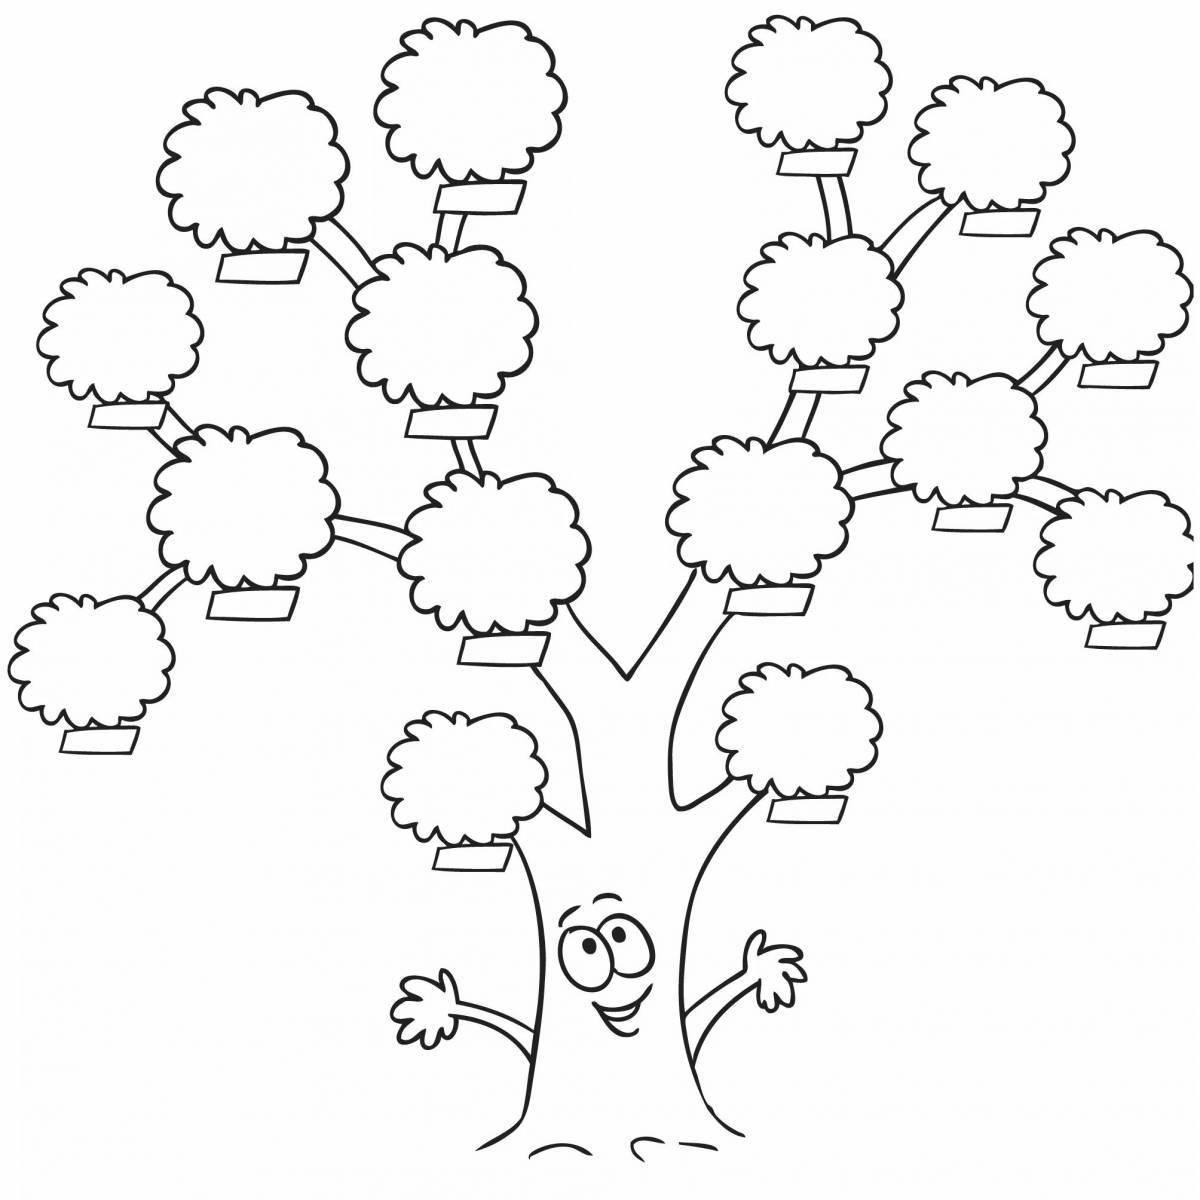 Cute family tree template